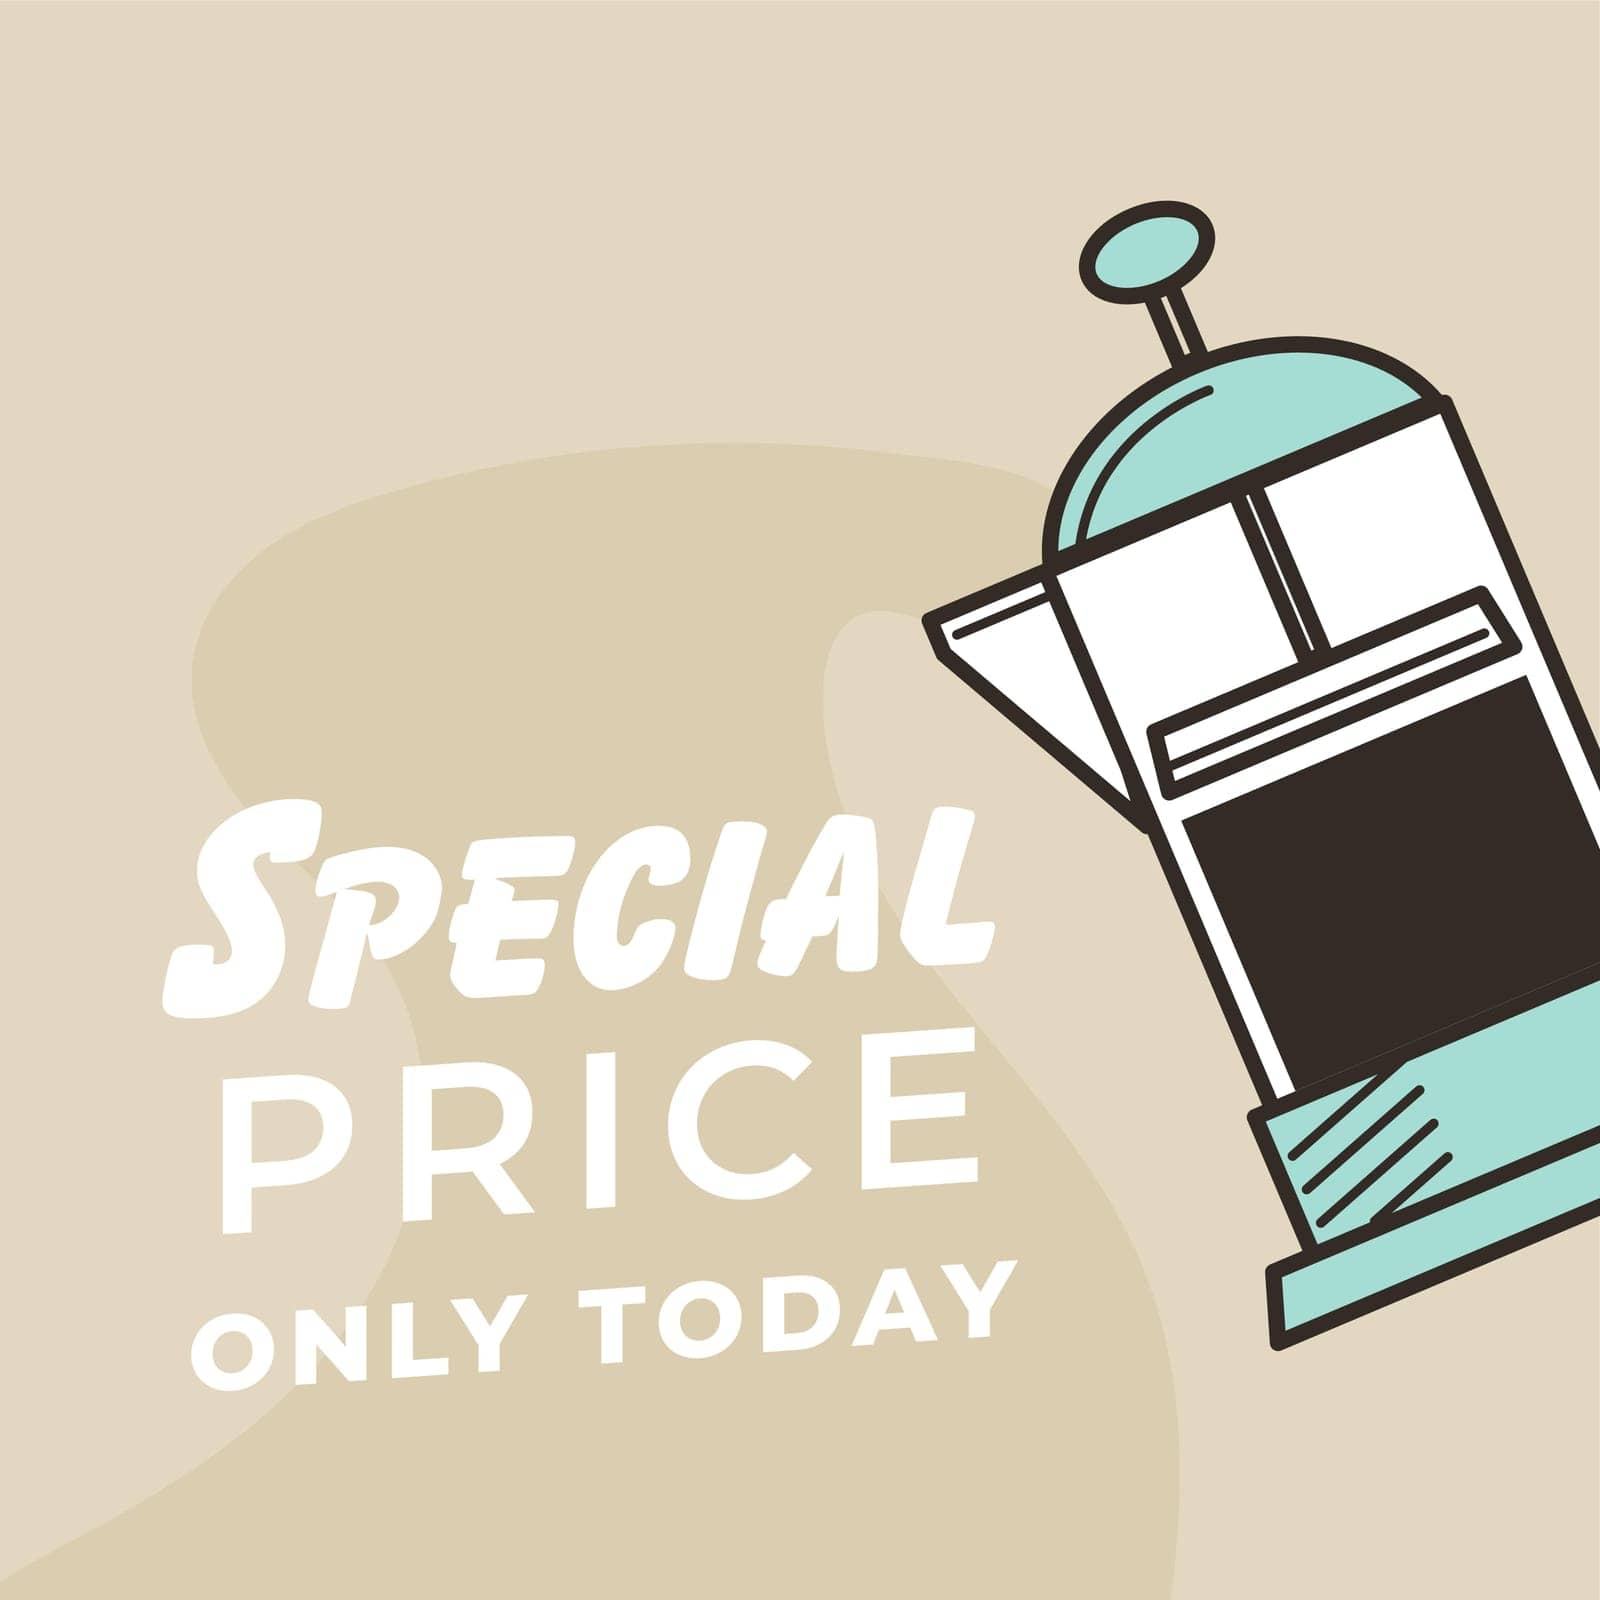 French press flavorful coffee with special price only today. Great choice for clients enjoying robust and aromatic caffeine beverage. Promotional banner or cafe advertisement, vector in flat style